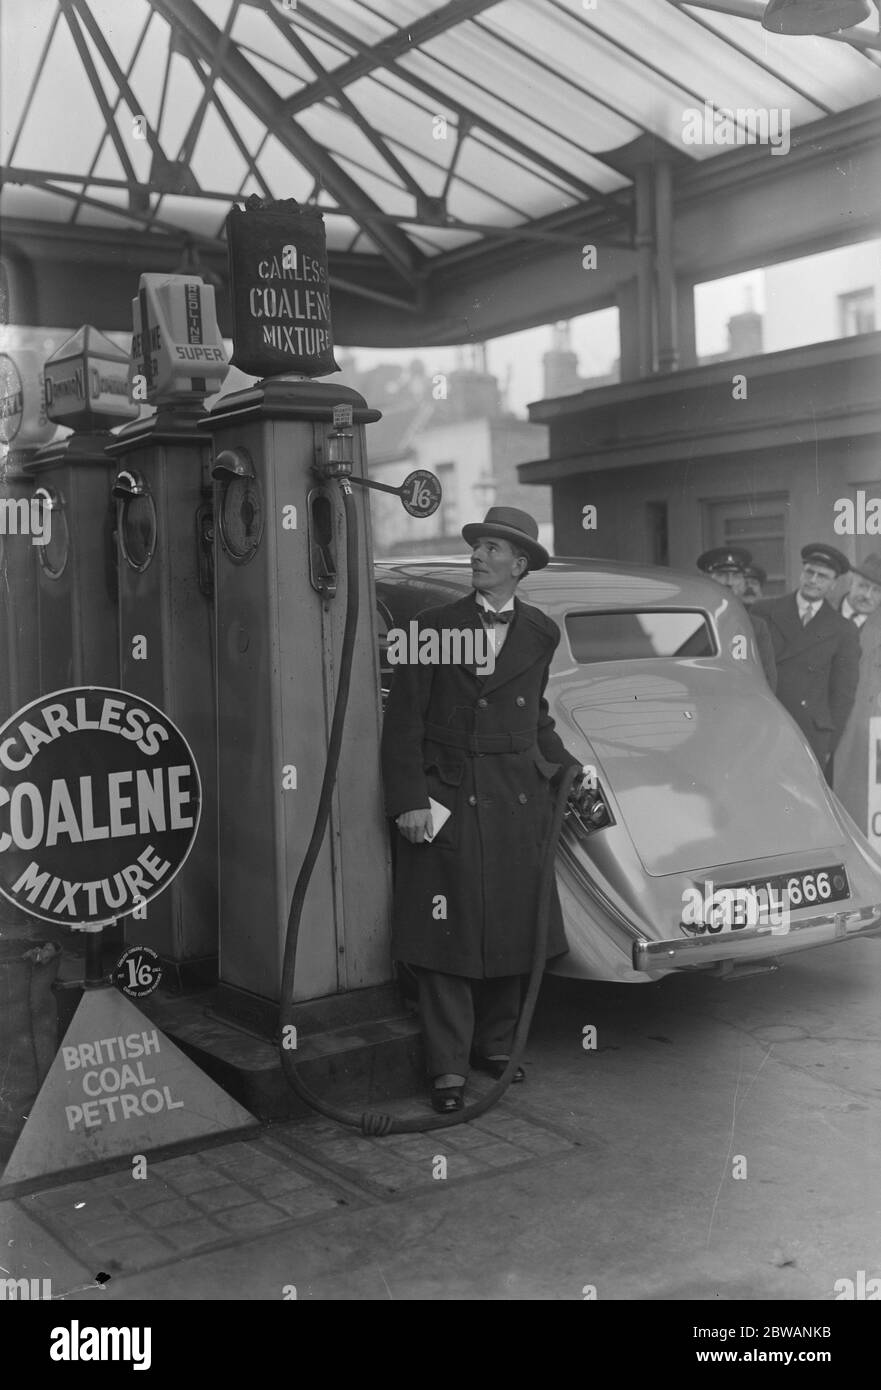 Petrol from British Coal Mr Tom Williams , M P , at the opening of the first pump to service petrol made from British coal ( at Brew Bros Ltd , 6 Gloucester Terrace , SW7 ) 29 November 1935 Stock Photo